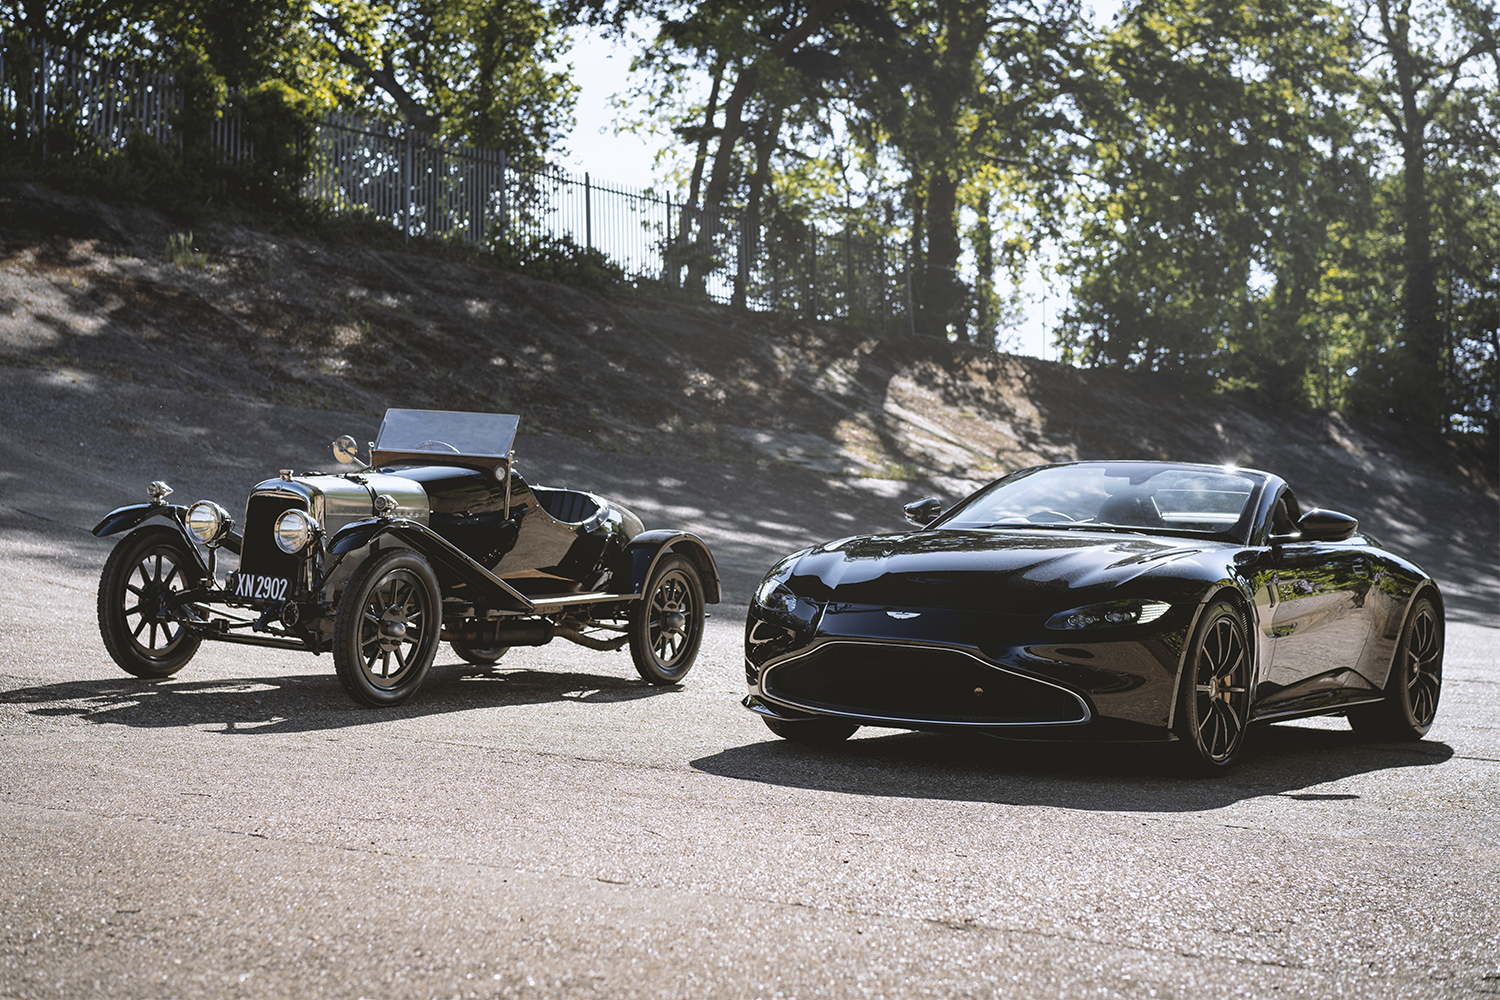 The Aston Martin A3, the automaker's oldest surviving car, next to a custom Vantage Roadster which pays tribute to the 1921 car